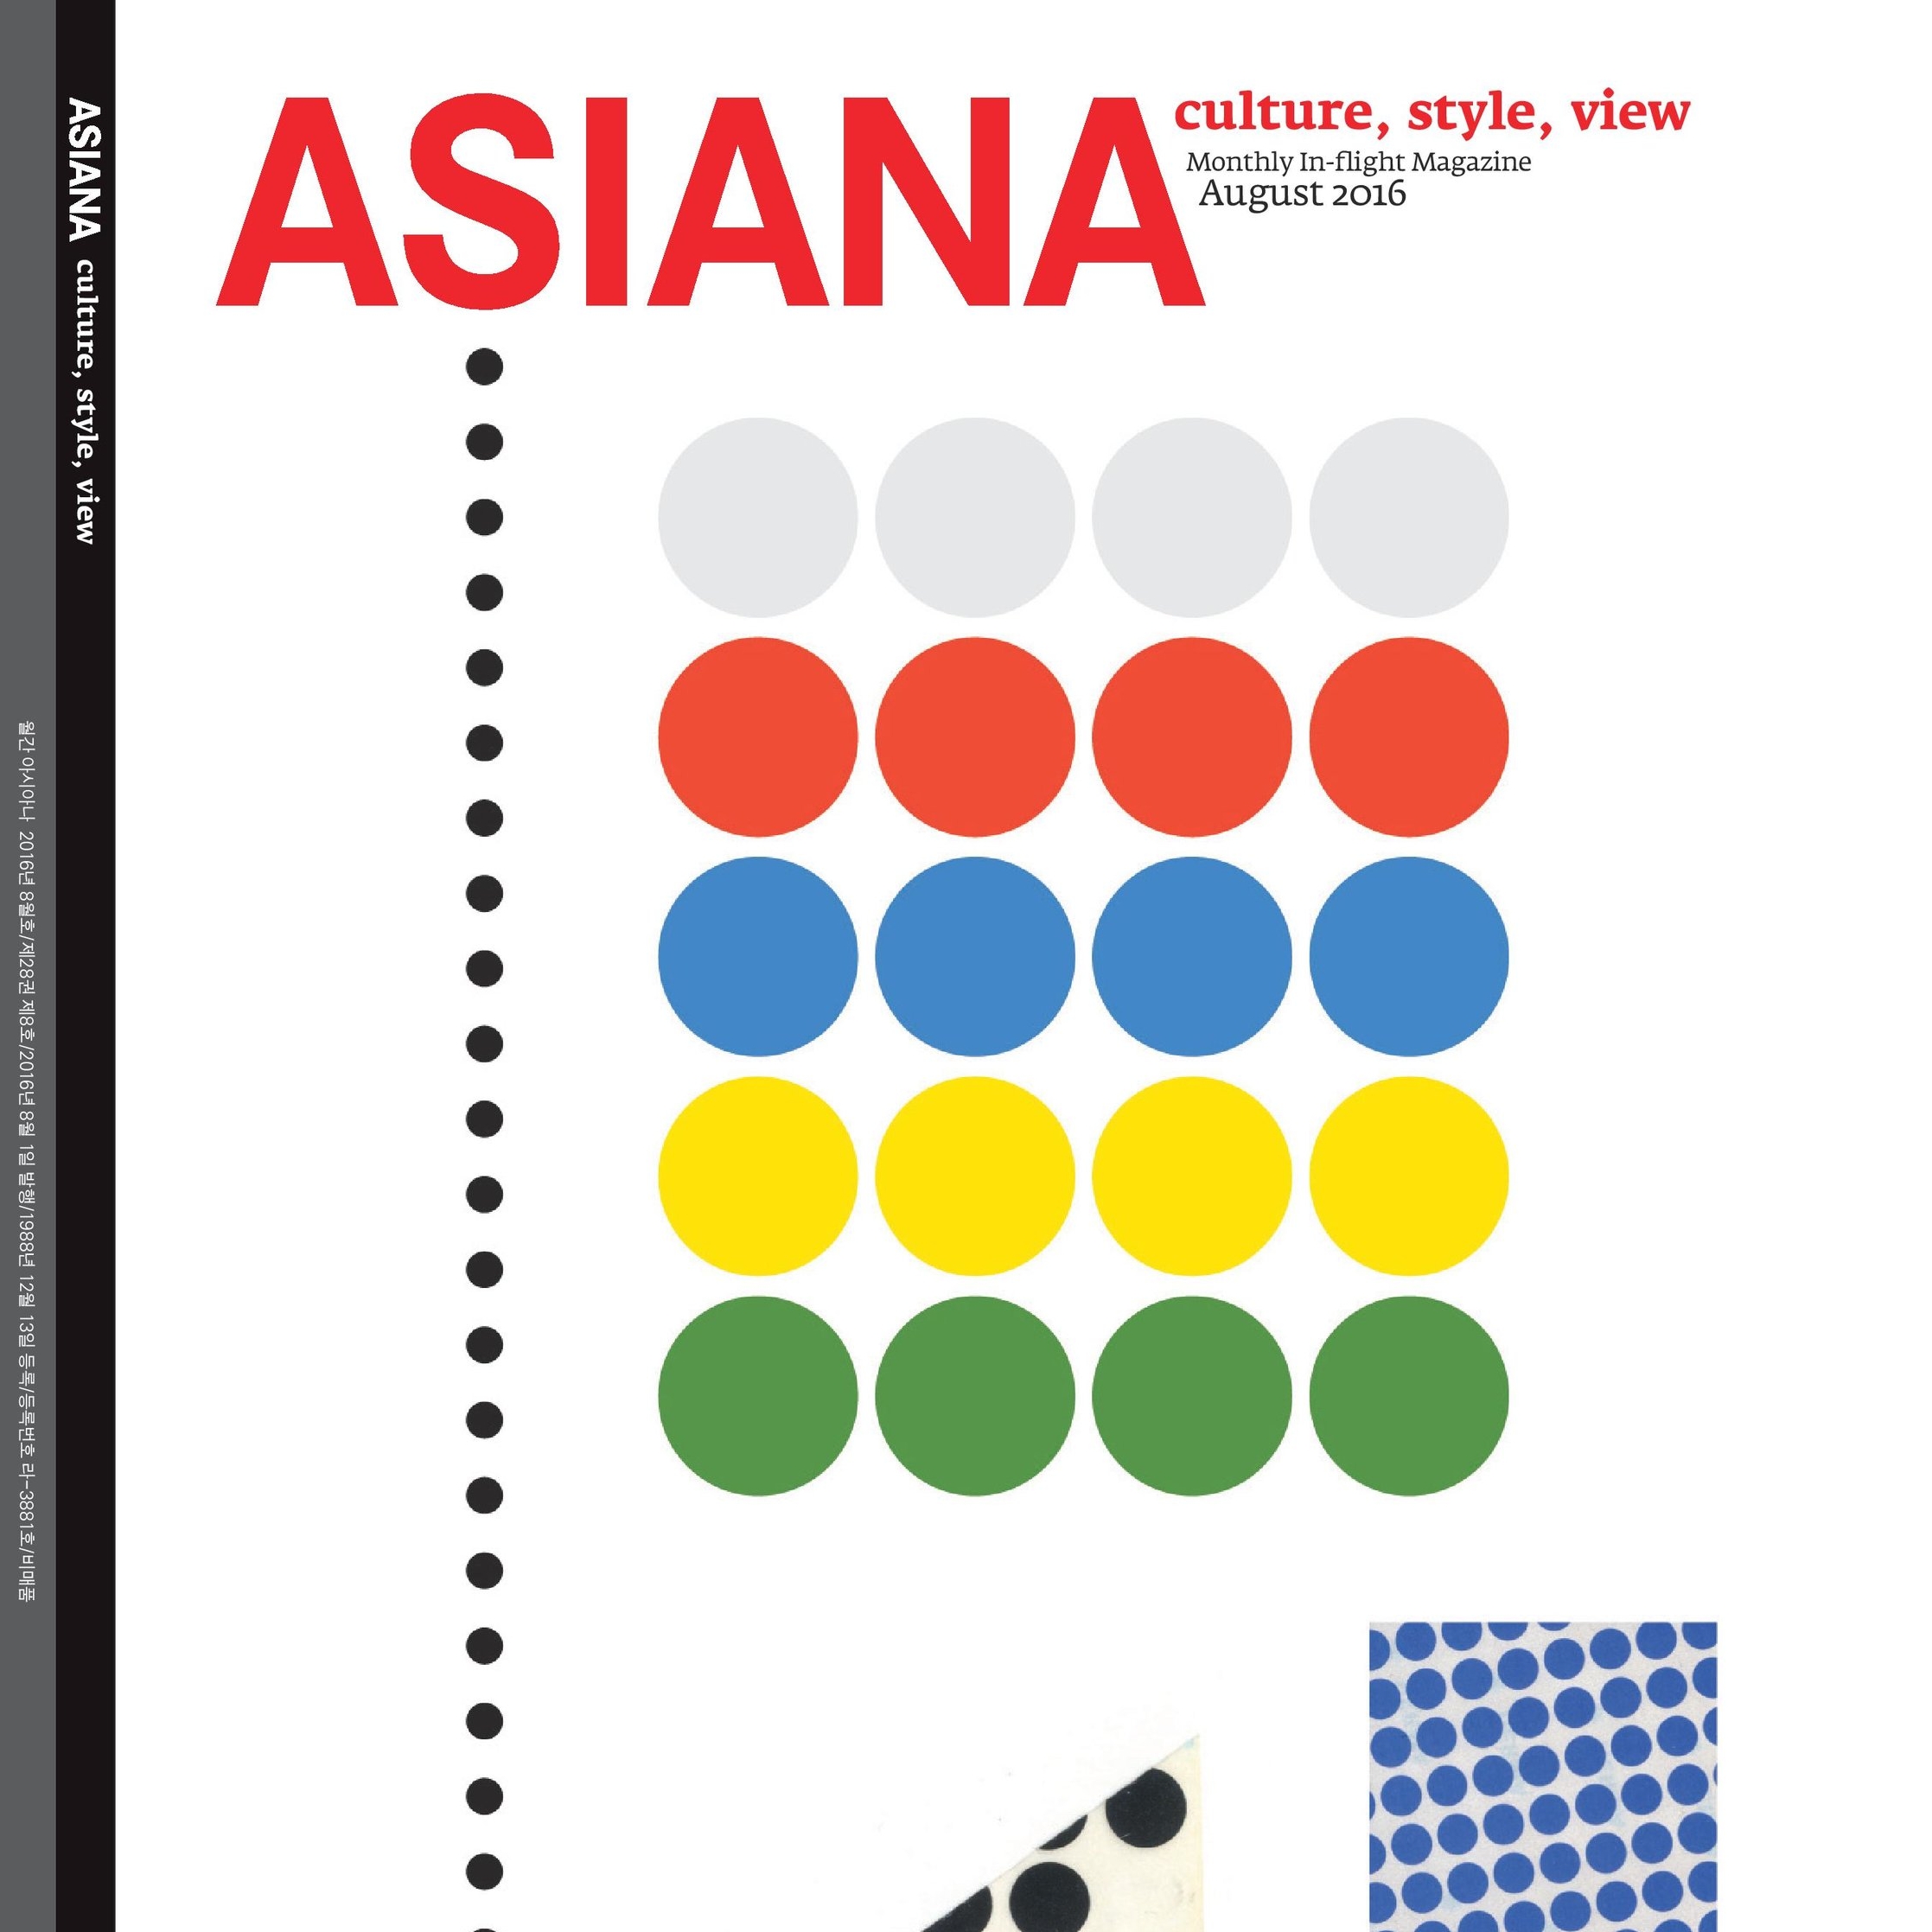 ASIANA, August 2016